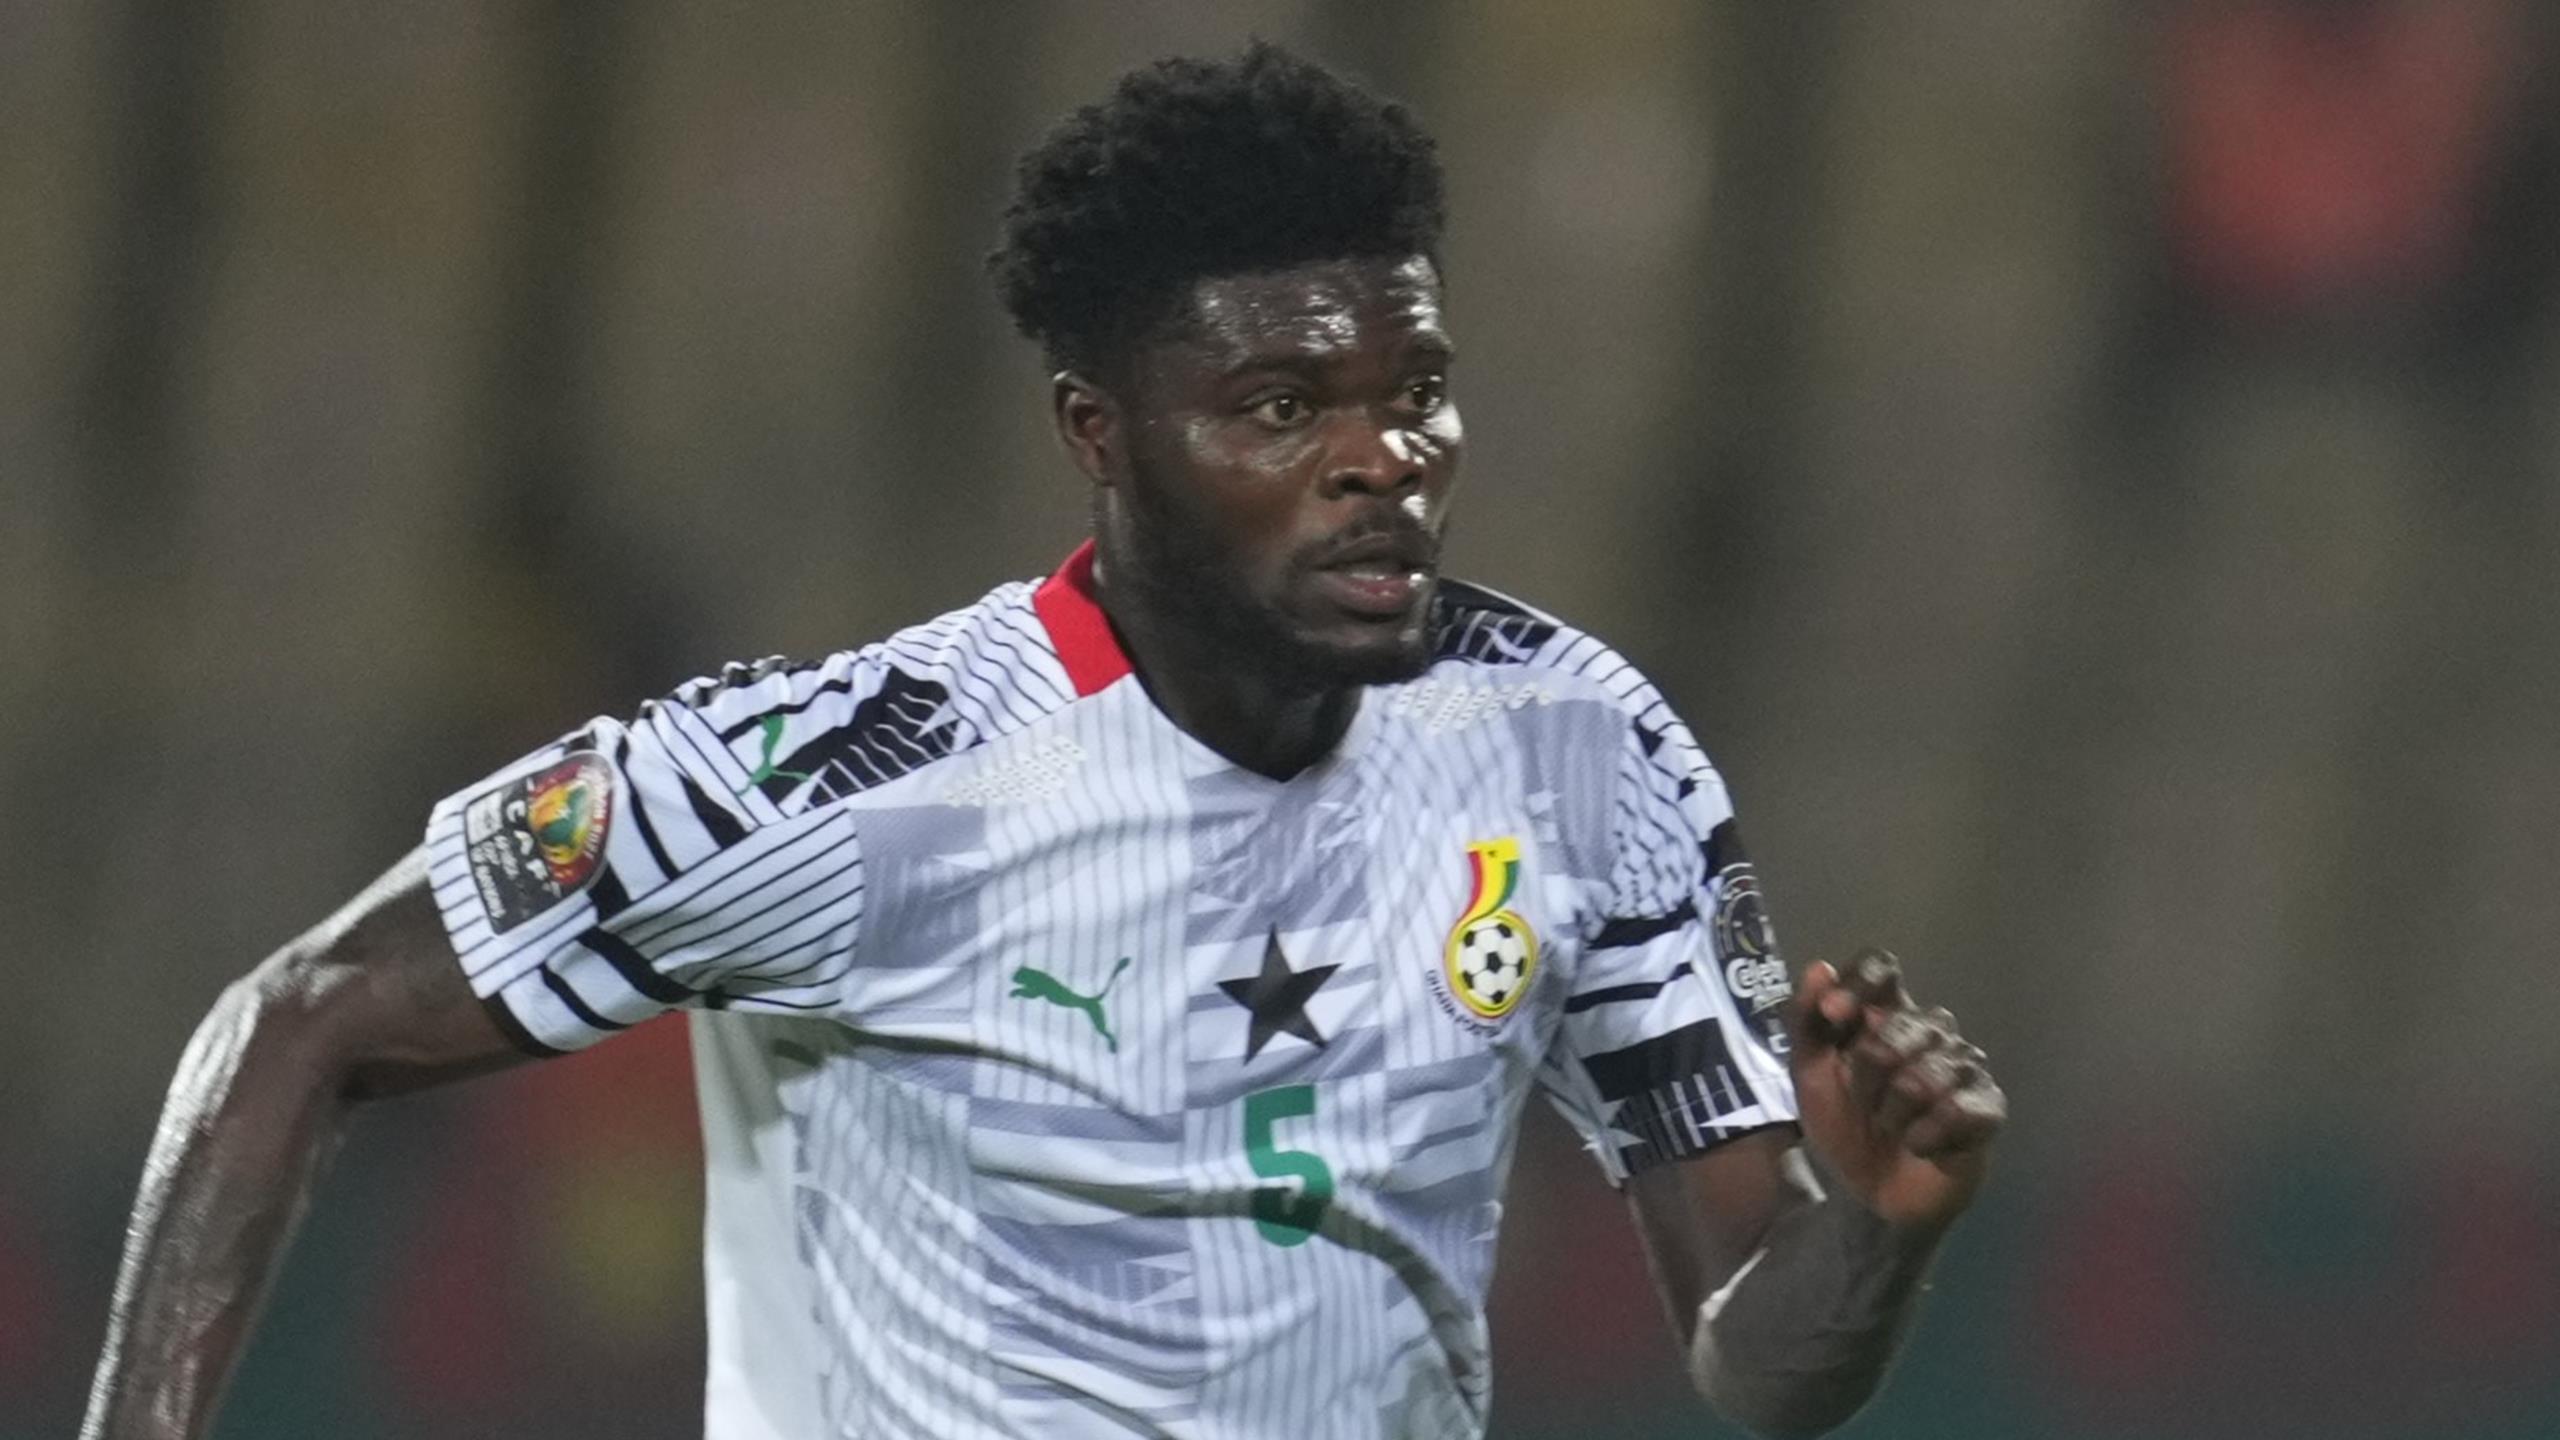 Thomas Partey of Ghana is listed as one of the tournament's stars to watch for the 2022 World Cup.